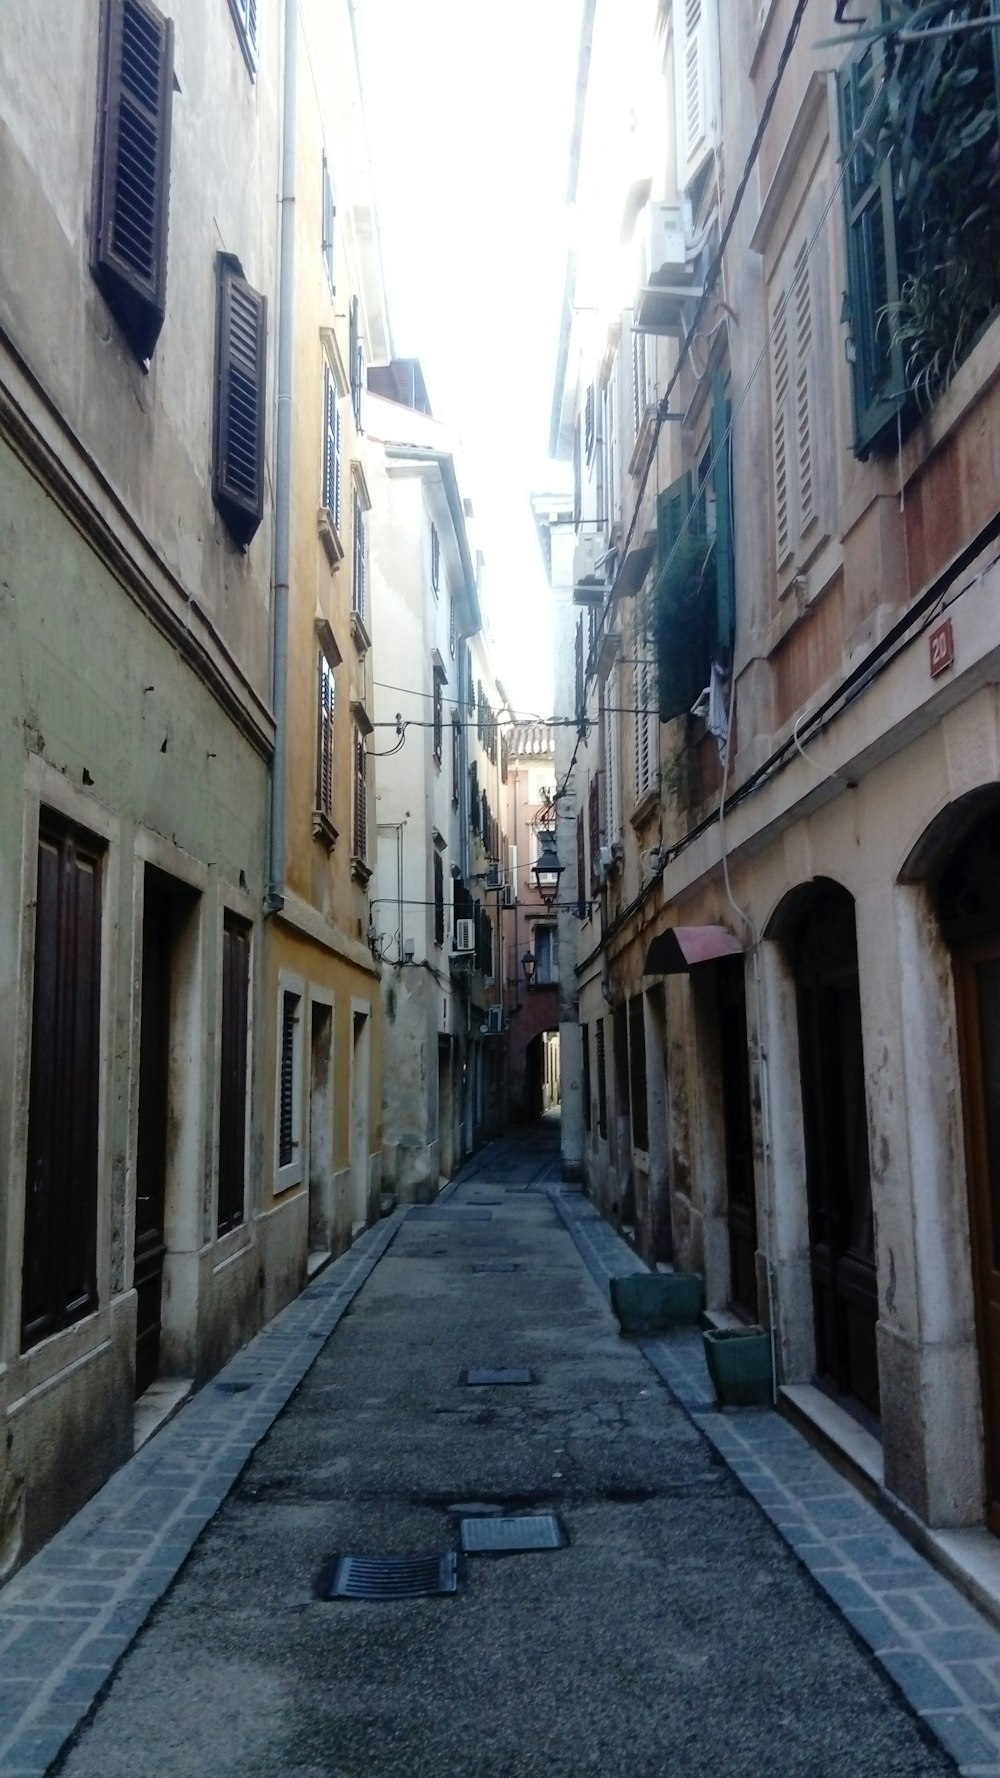 a narrow alley way in an old city